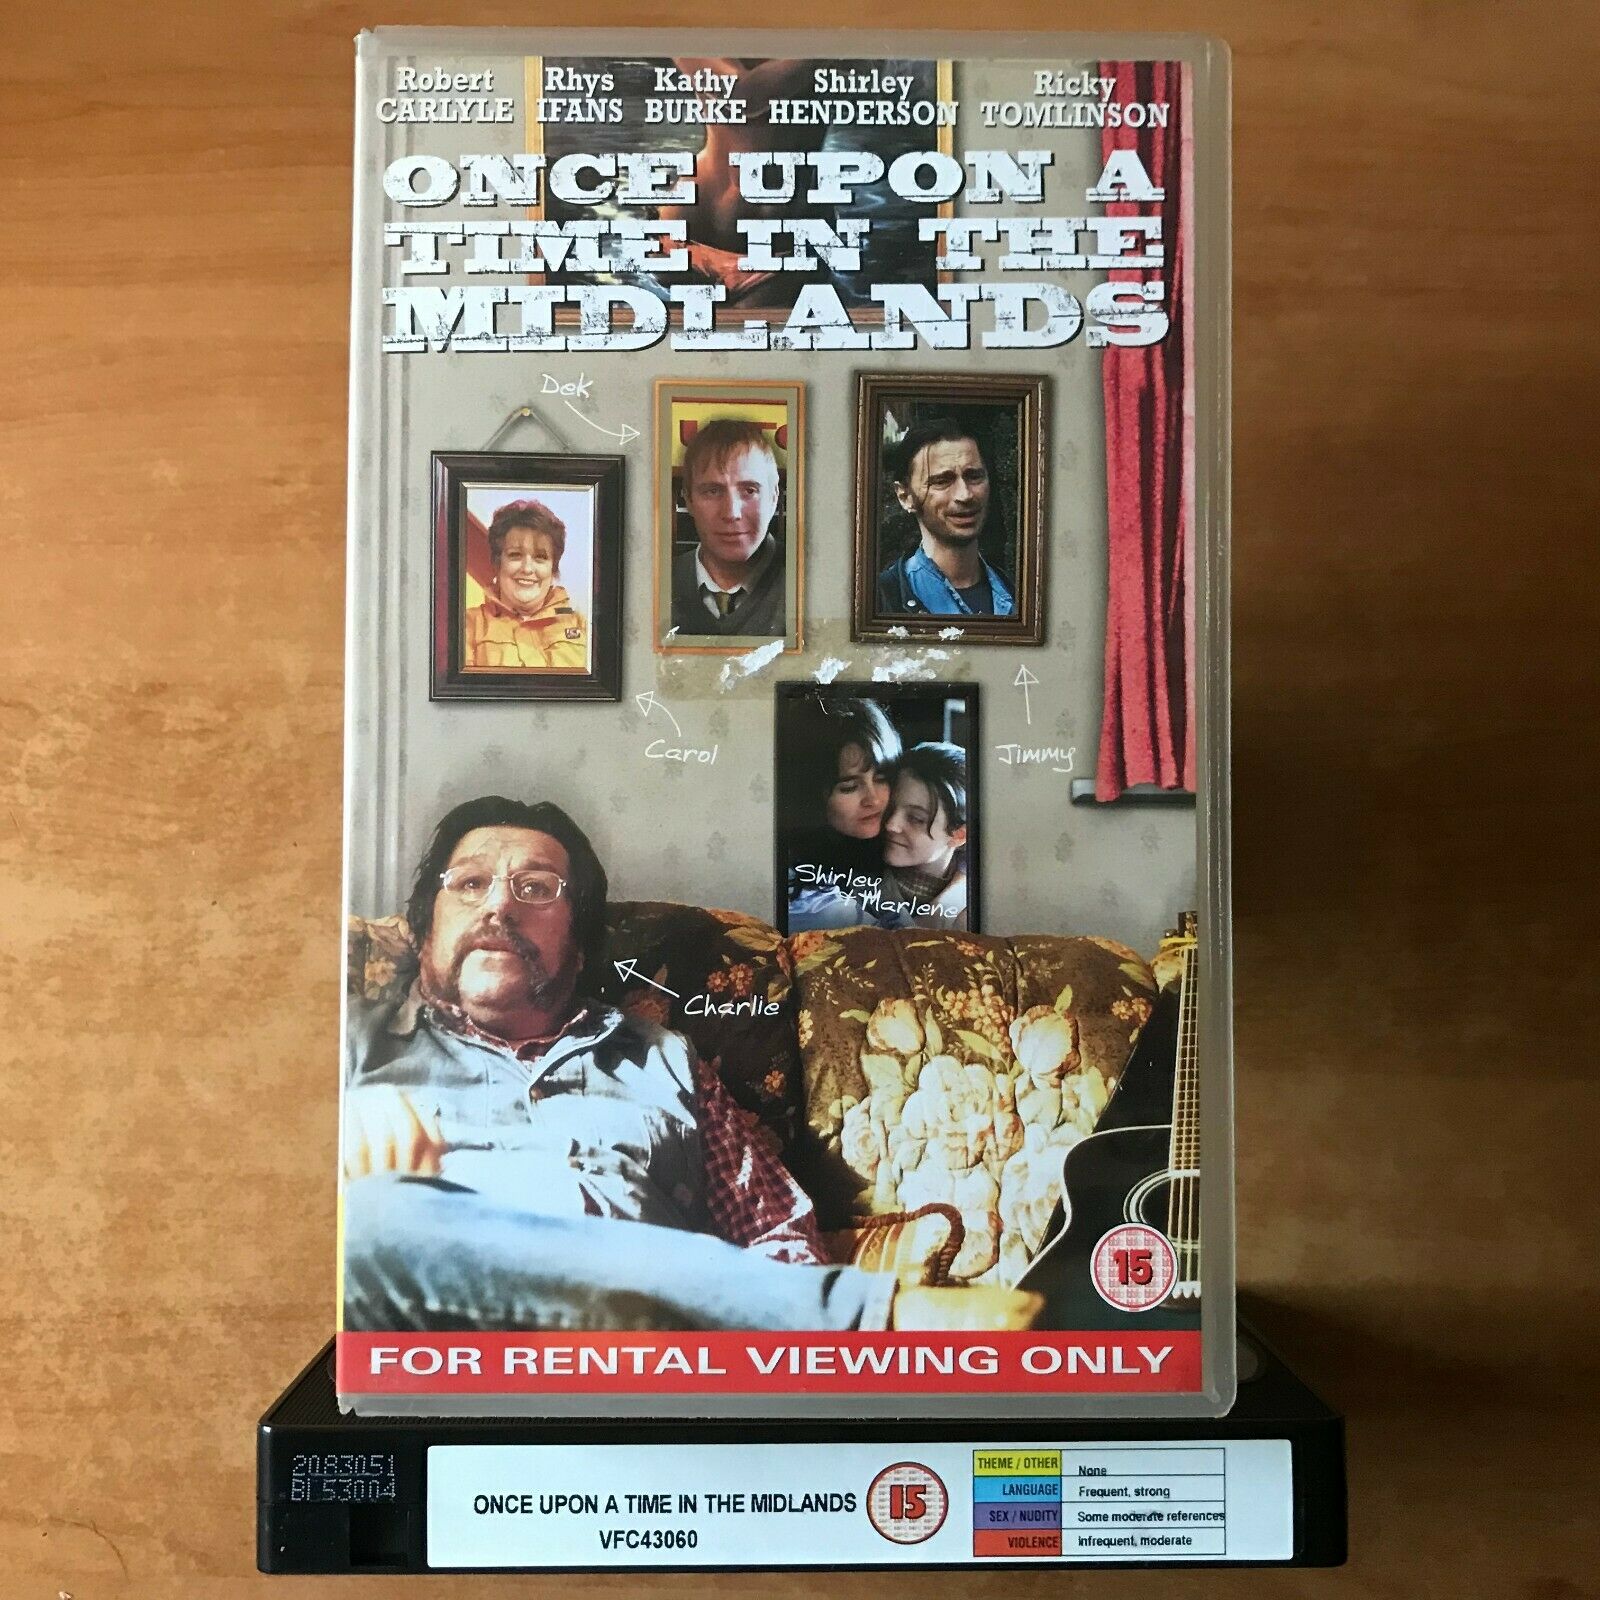 Once Upon A Time In The Midlands: Romantic Comedy [Large Box] Rental - Pal VHS-